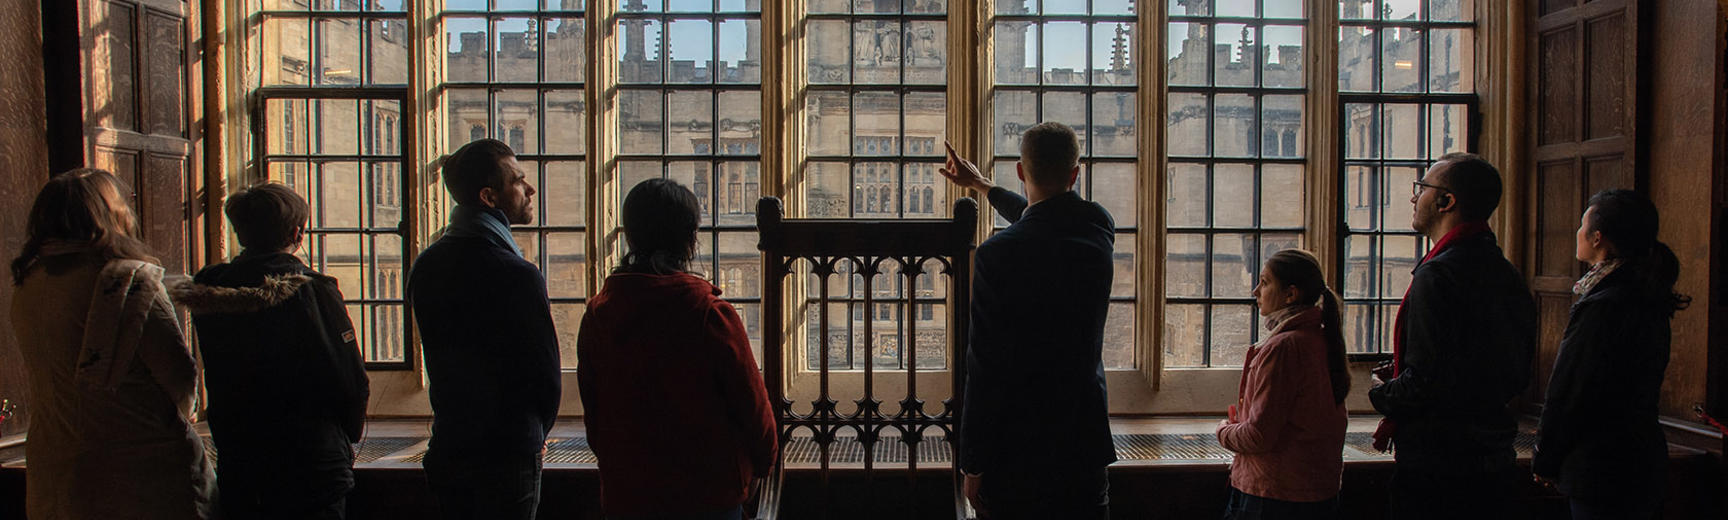 A silhouette of a group looking out of a large window with individual panes separated by lead